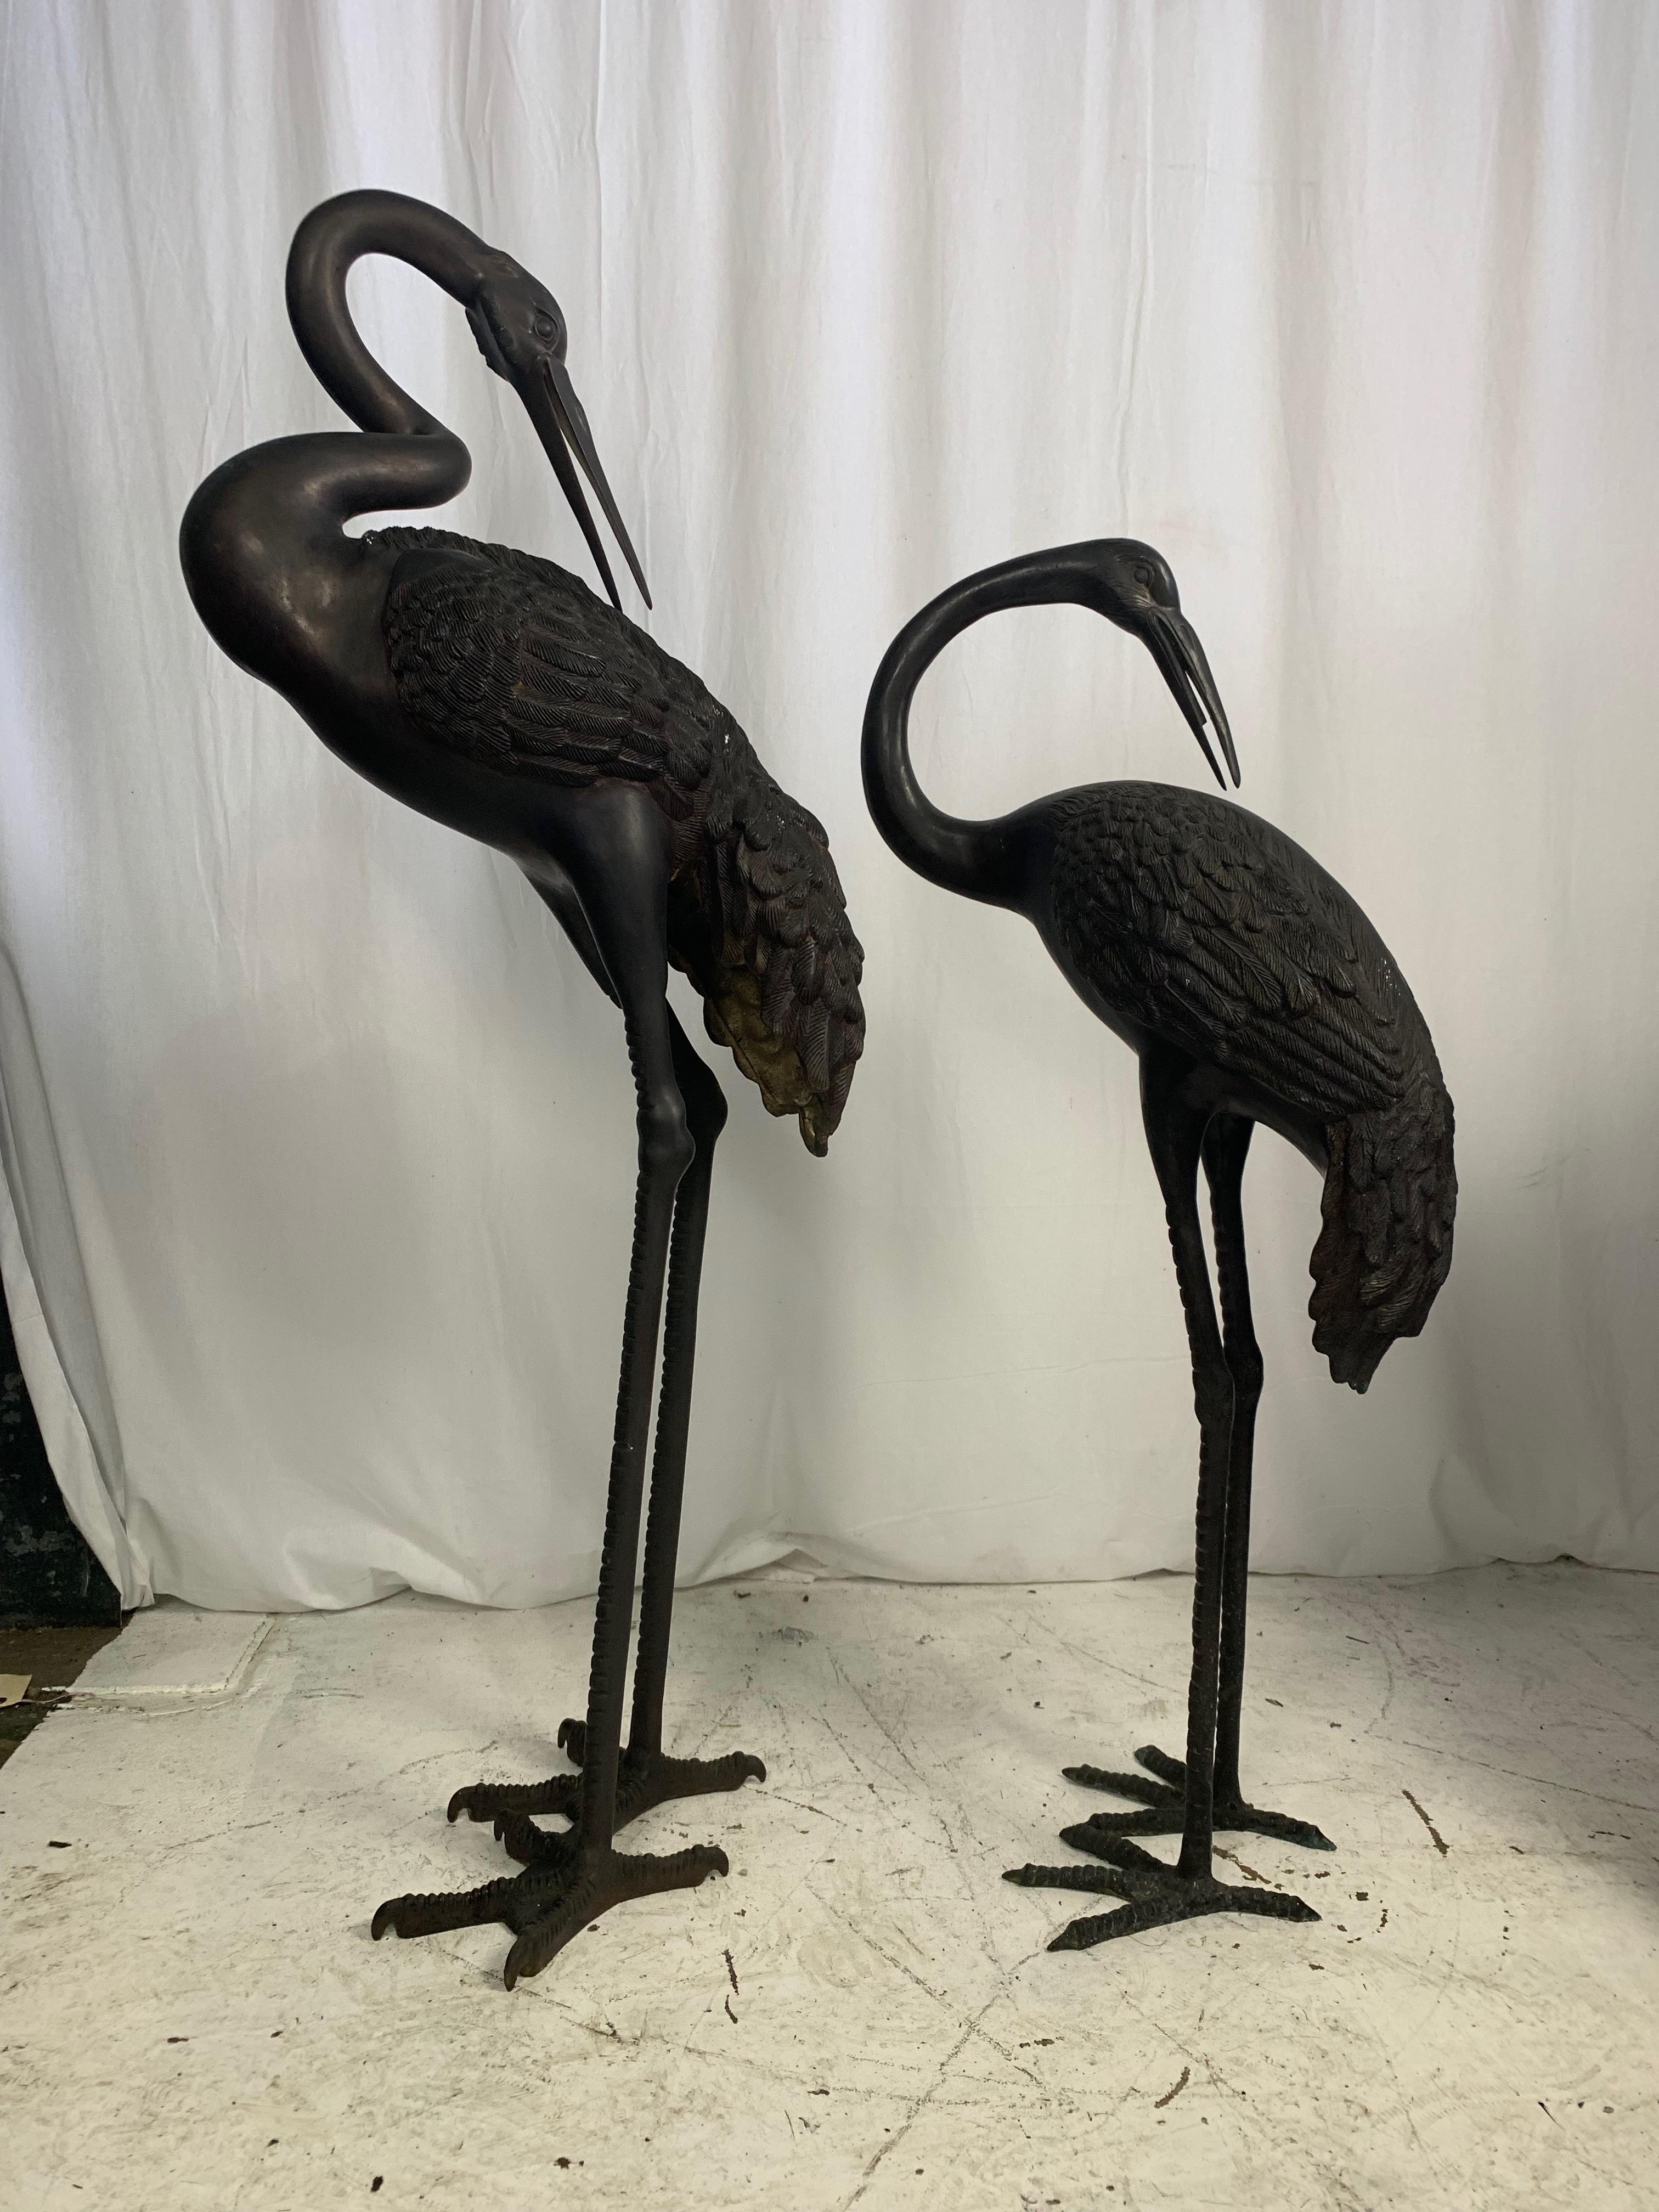 A pair of large bronze oriental cranes. A symbol of longevity and wisdom in oriental mythology, the crane is also considered to be the intermediary between earth and heaven.
Measures: Male crane- height 55 (inches), width 21 (inches), depth 9